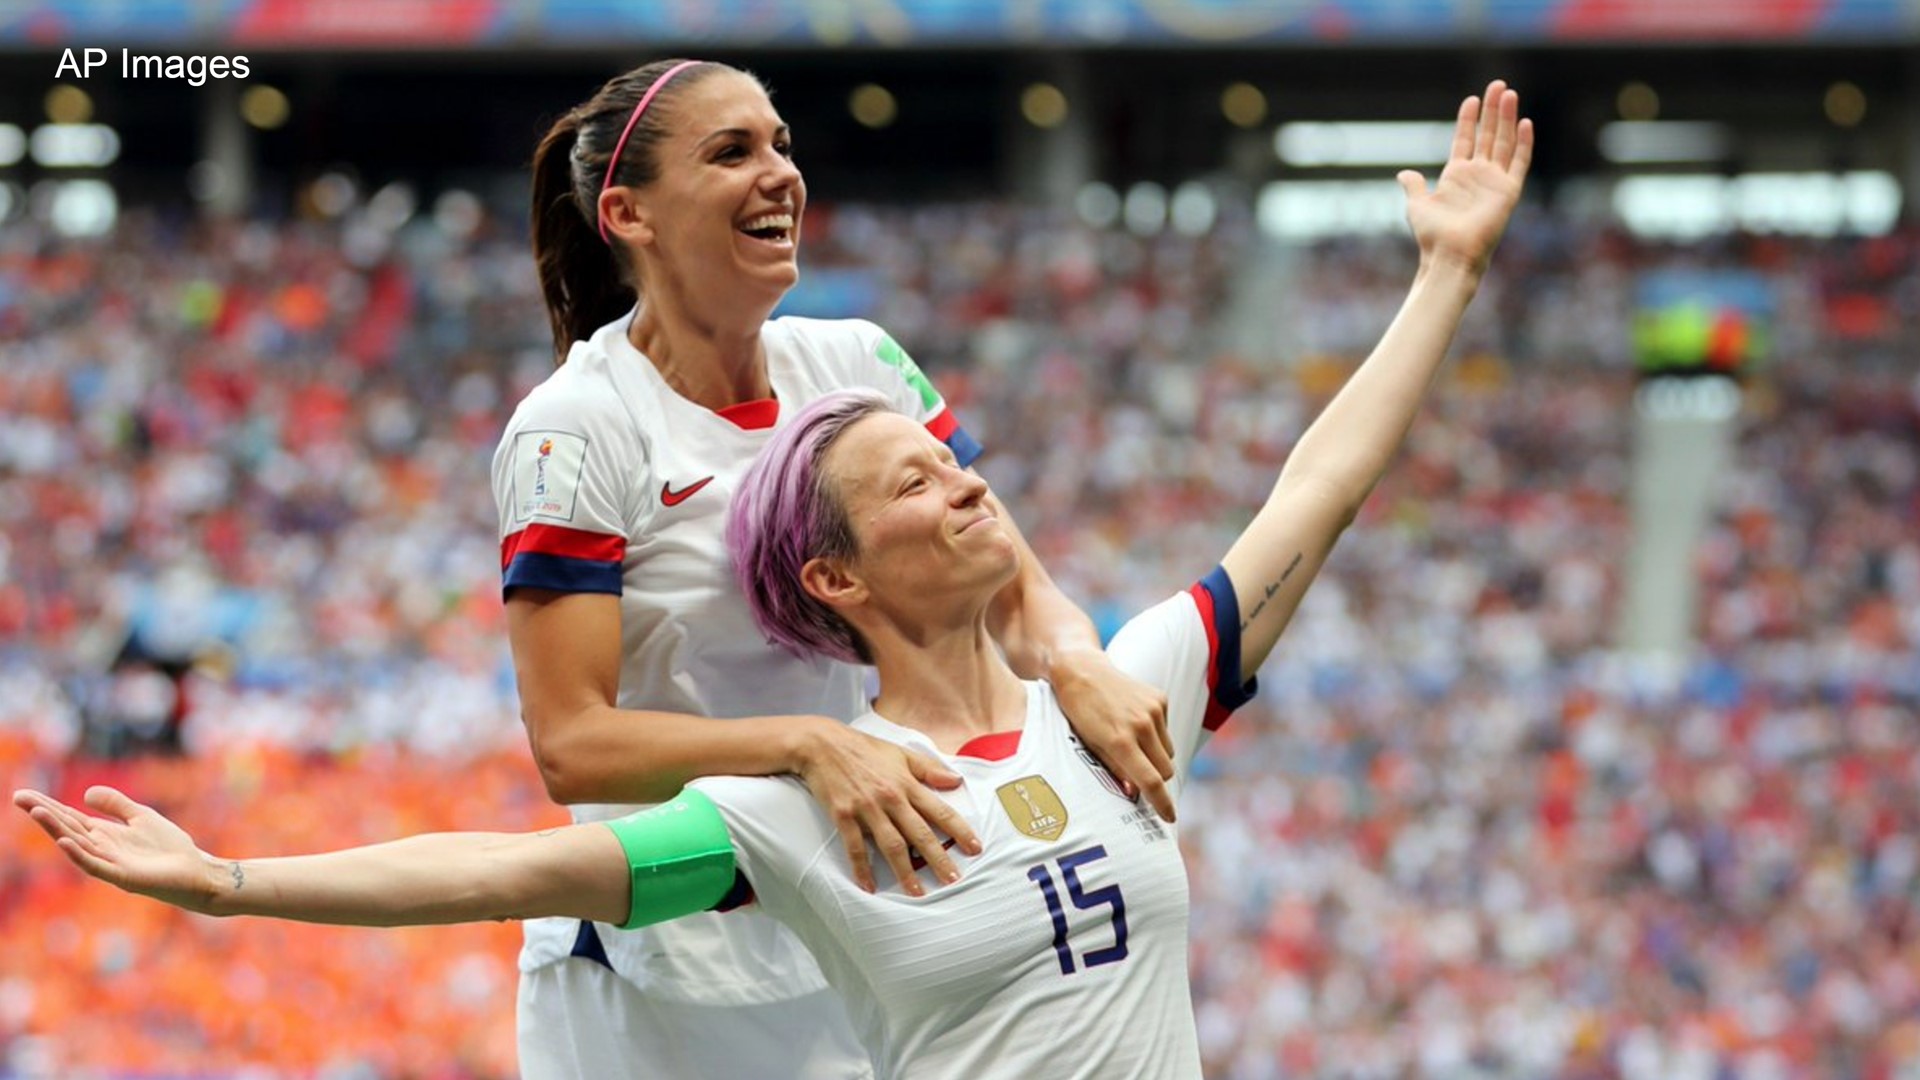 Athletes and celebrities react to the historic news from U.S. Soccer that the men's and women's teams will both receive equal pay